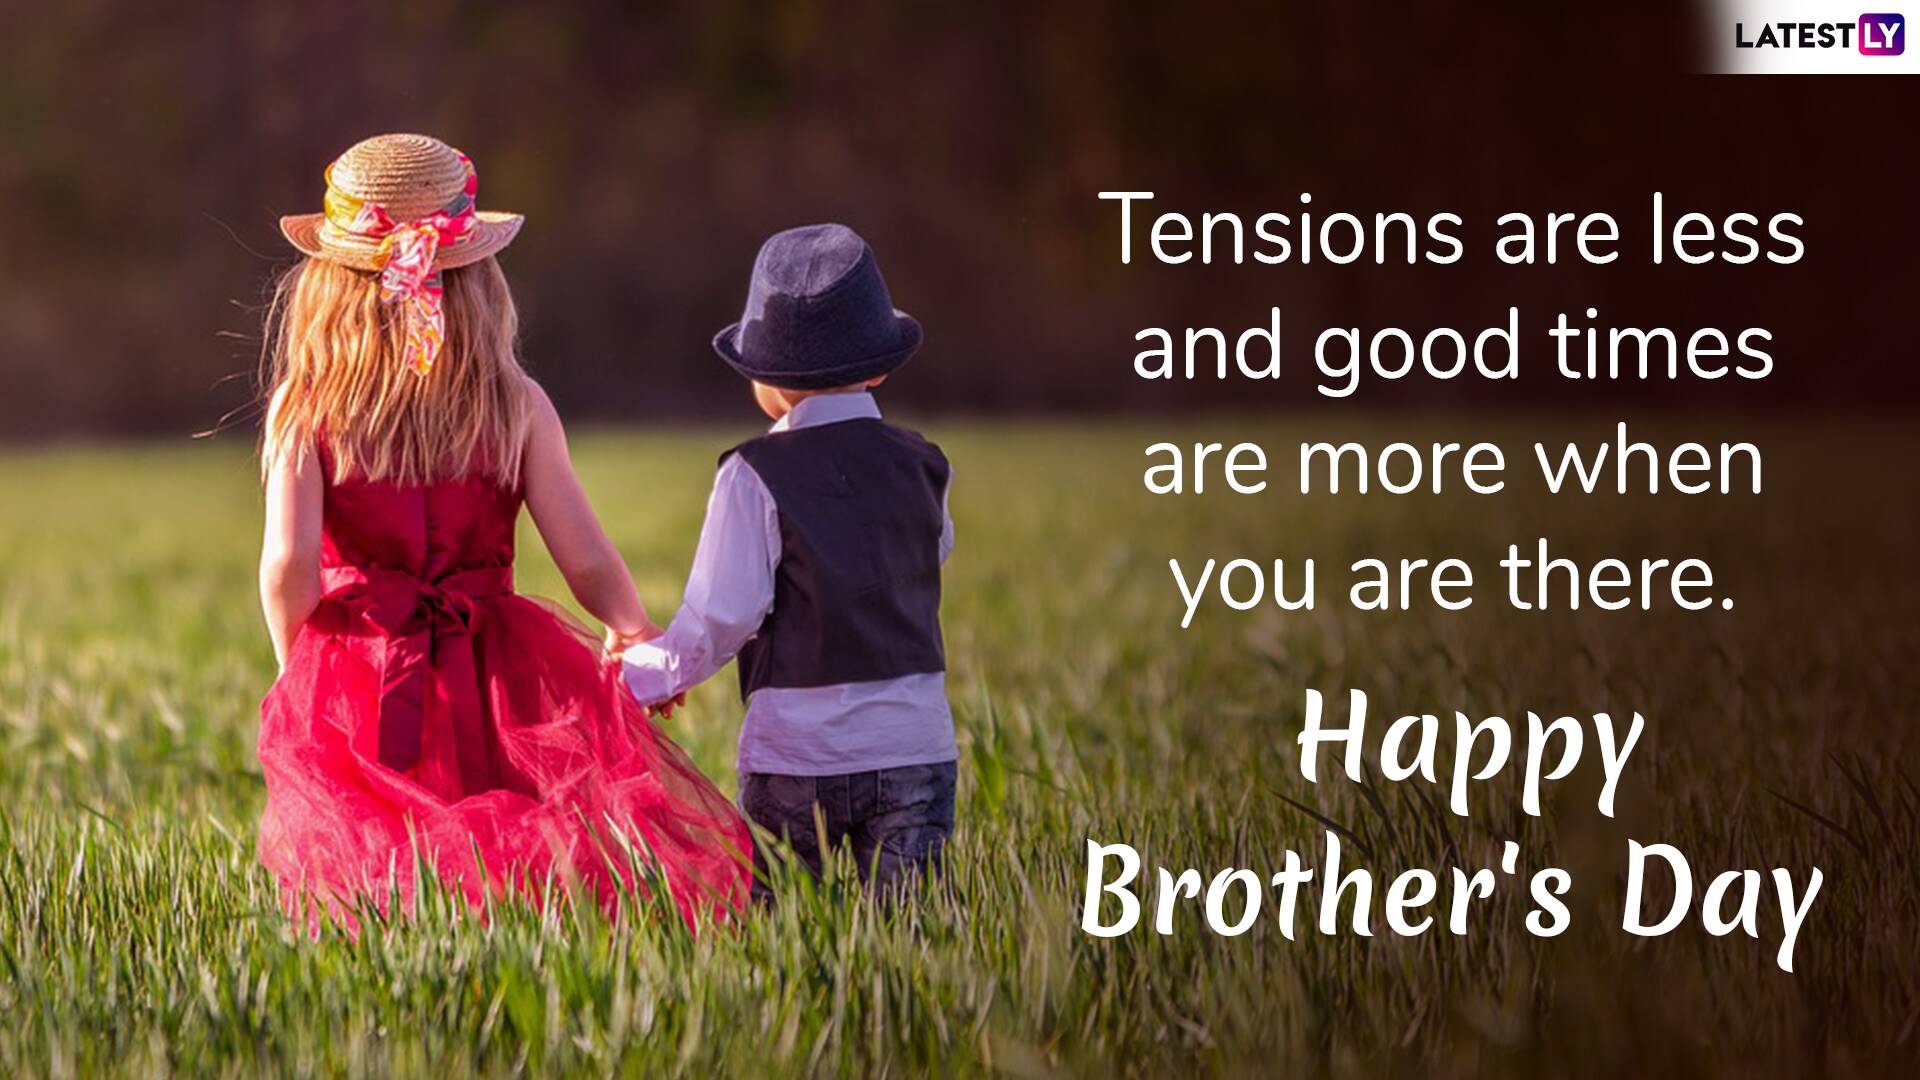 Happy National Brother's Day 2019 Greetings: WhatsApp Stickers